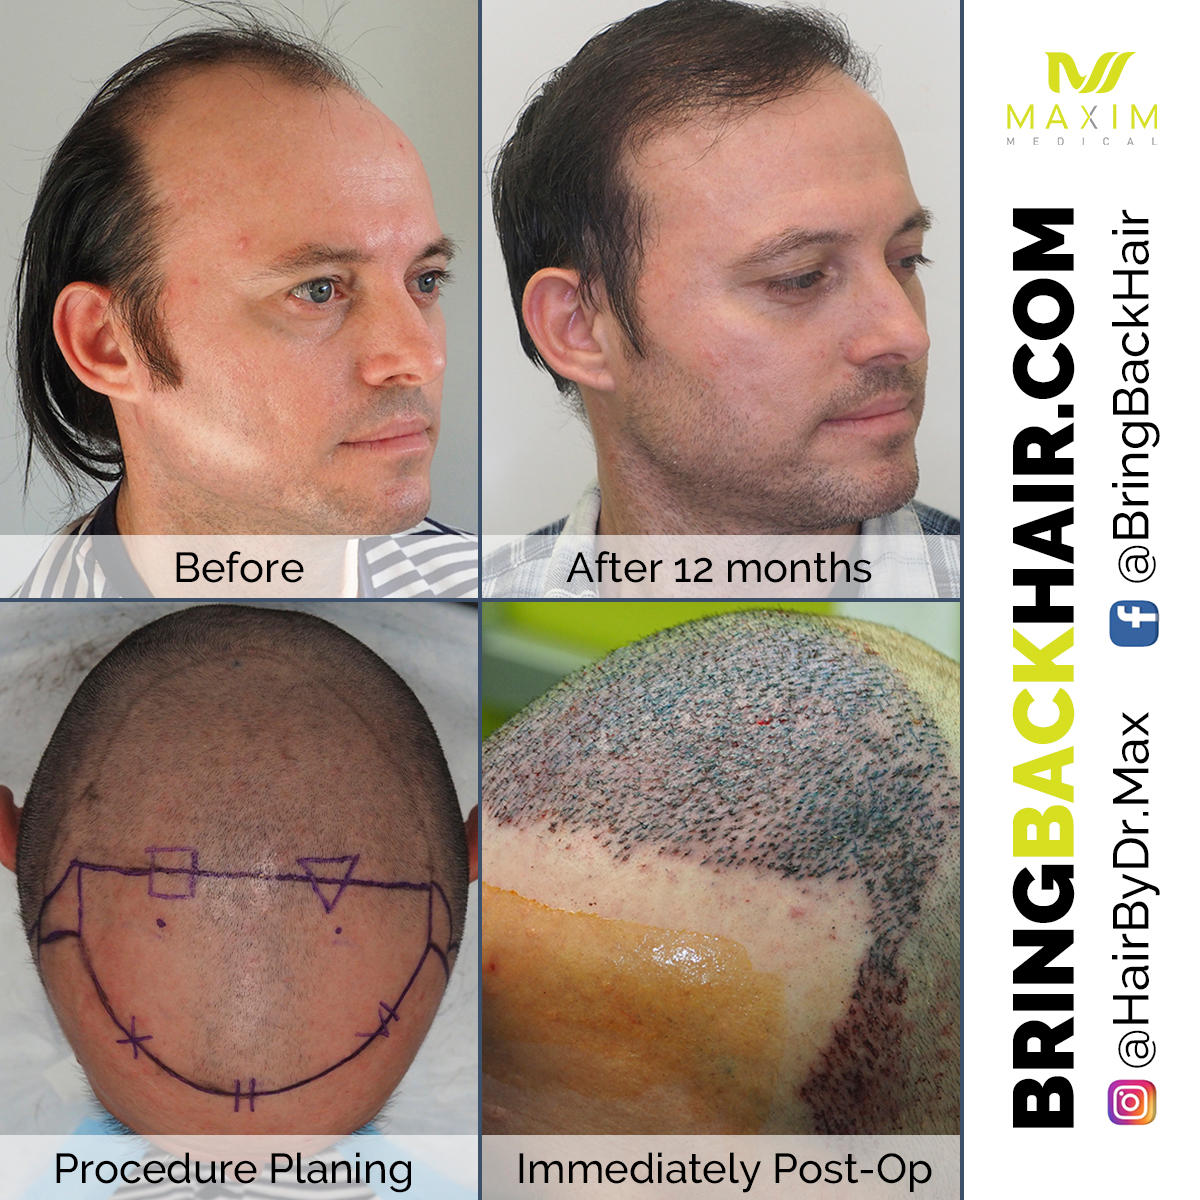 ARTAS robotic technology revolutionizes hair restoration. Here are the results of Carlos, an ARTAS patient who achieved their dream results. Using ARTAS robotic technology, Dr. Chumak helped restore Carlos’ hair to its full vitality. Want your hair back too? Visit our website to see just how at www.bringbackhair.com , along with other testimonials